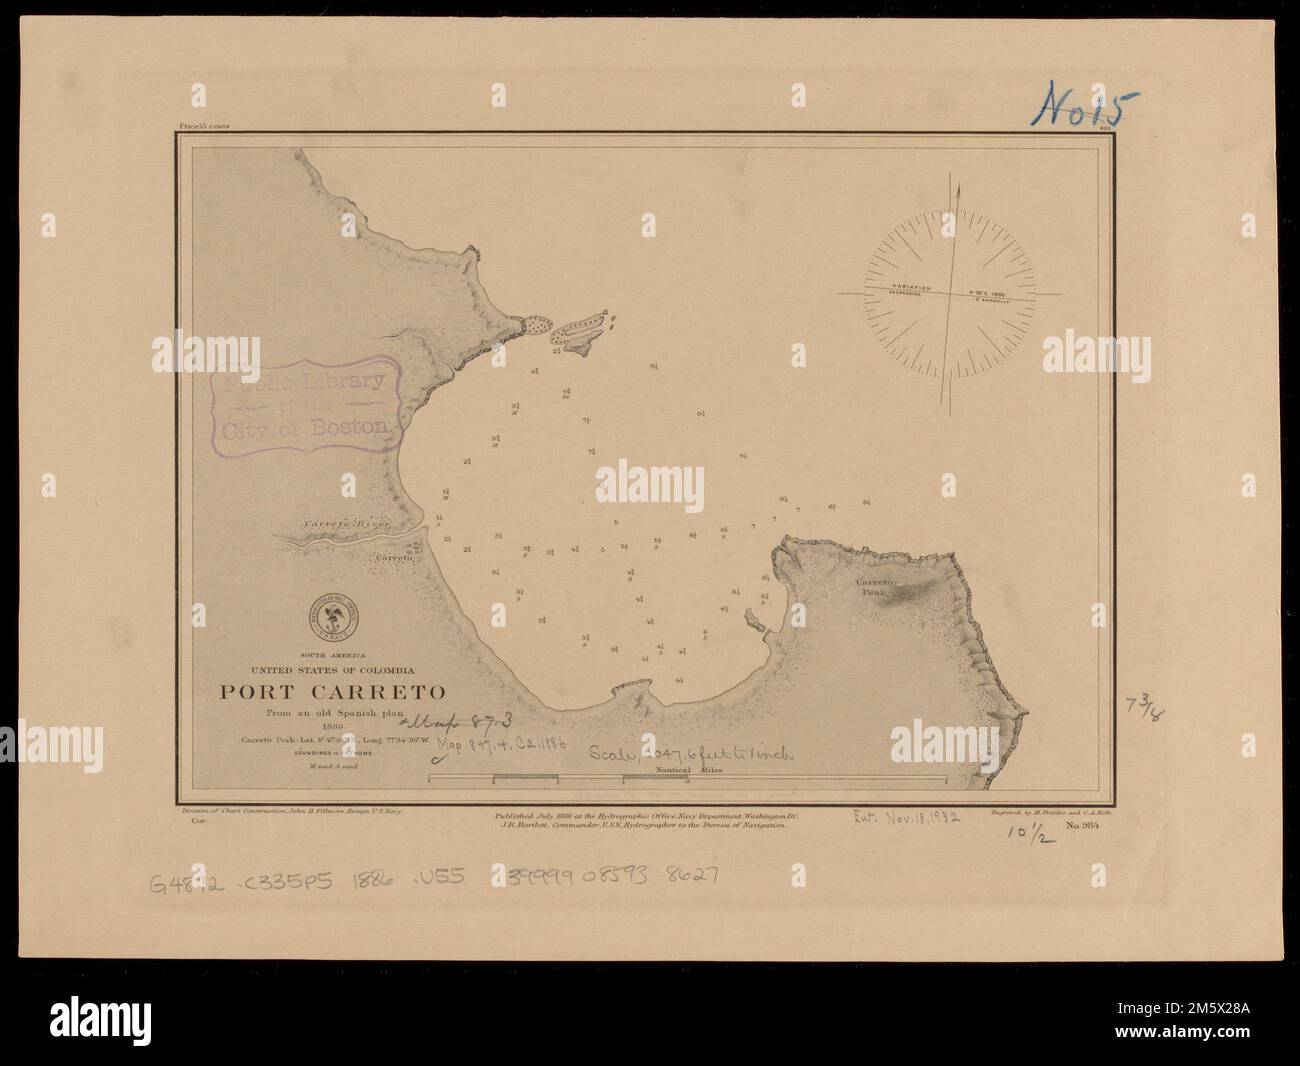 South America, United States of Colombia, Port Carreto : from an old Spanish plan 1886. Relief shown by hachures. Depths shown by soundings... Port Carreto. Port Carreto, Panama  , San Blas  ,special territory  Bahía de Carreto Stock Photo